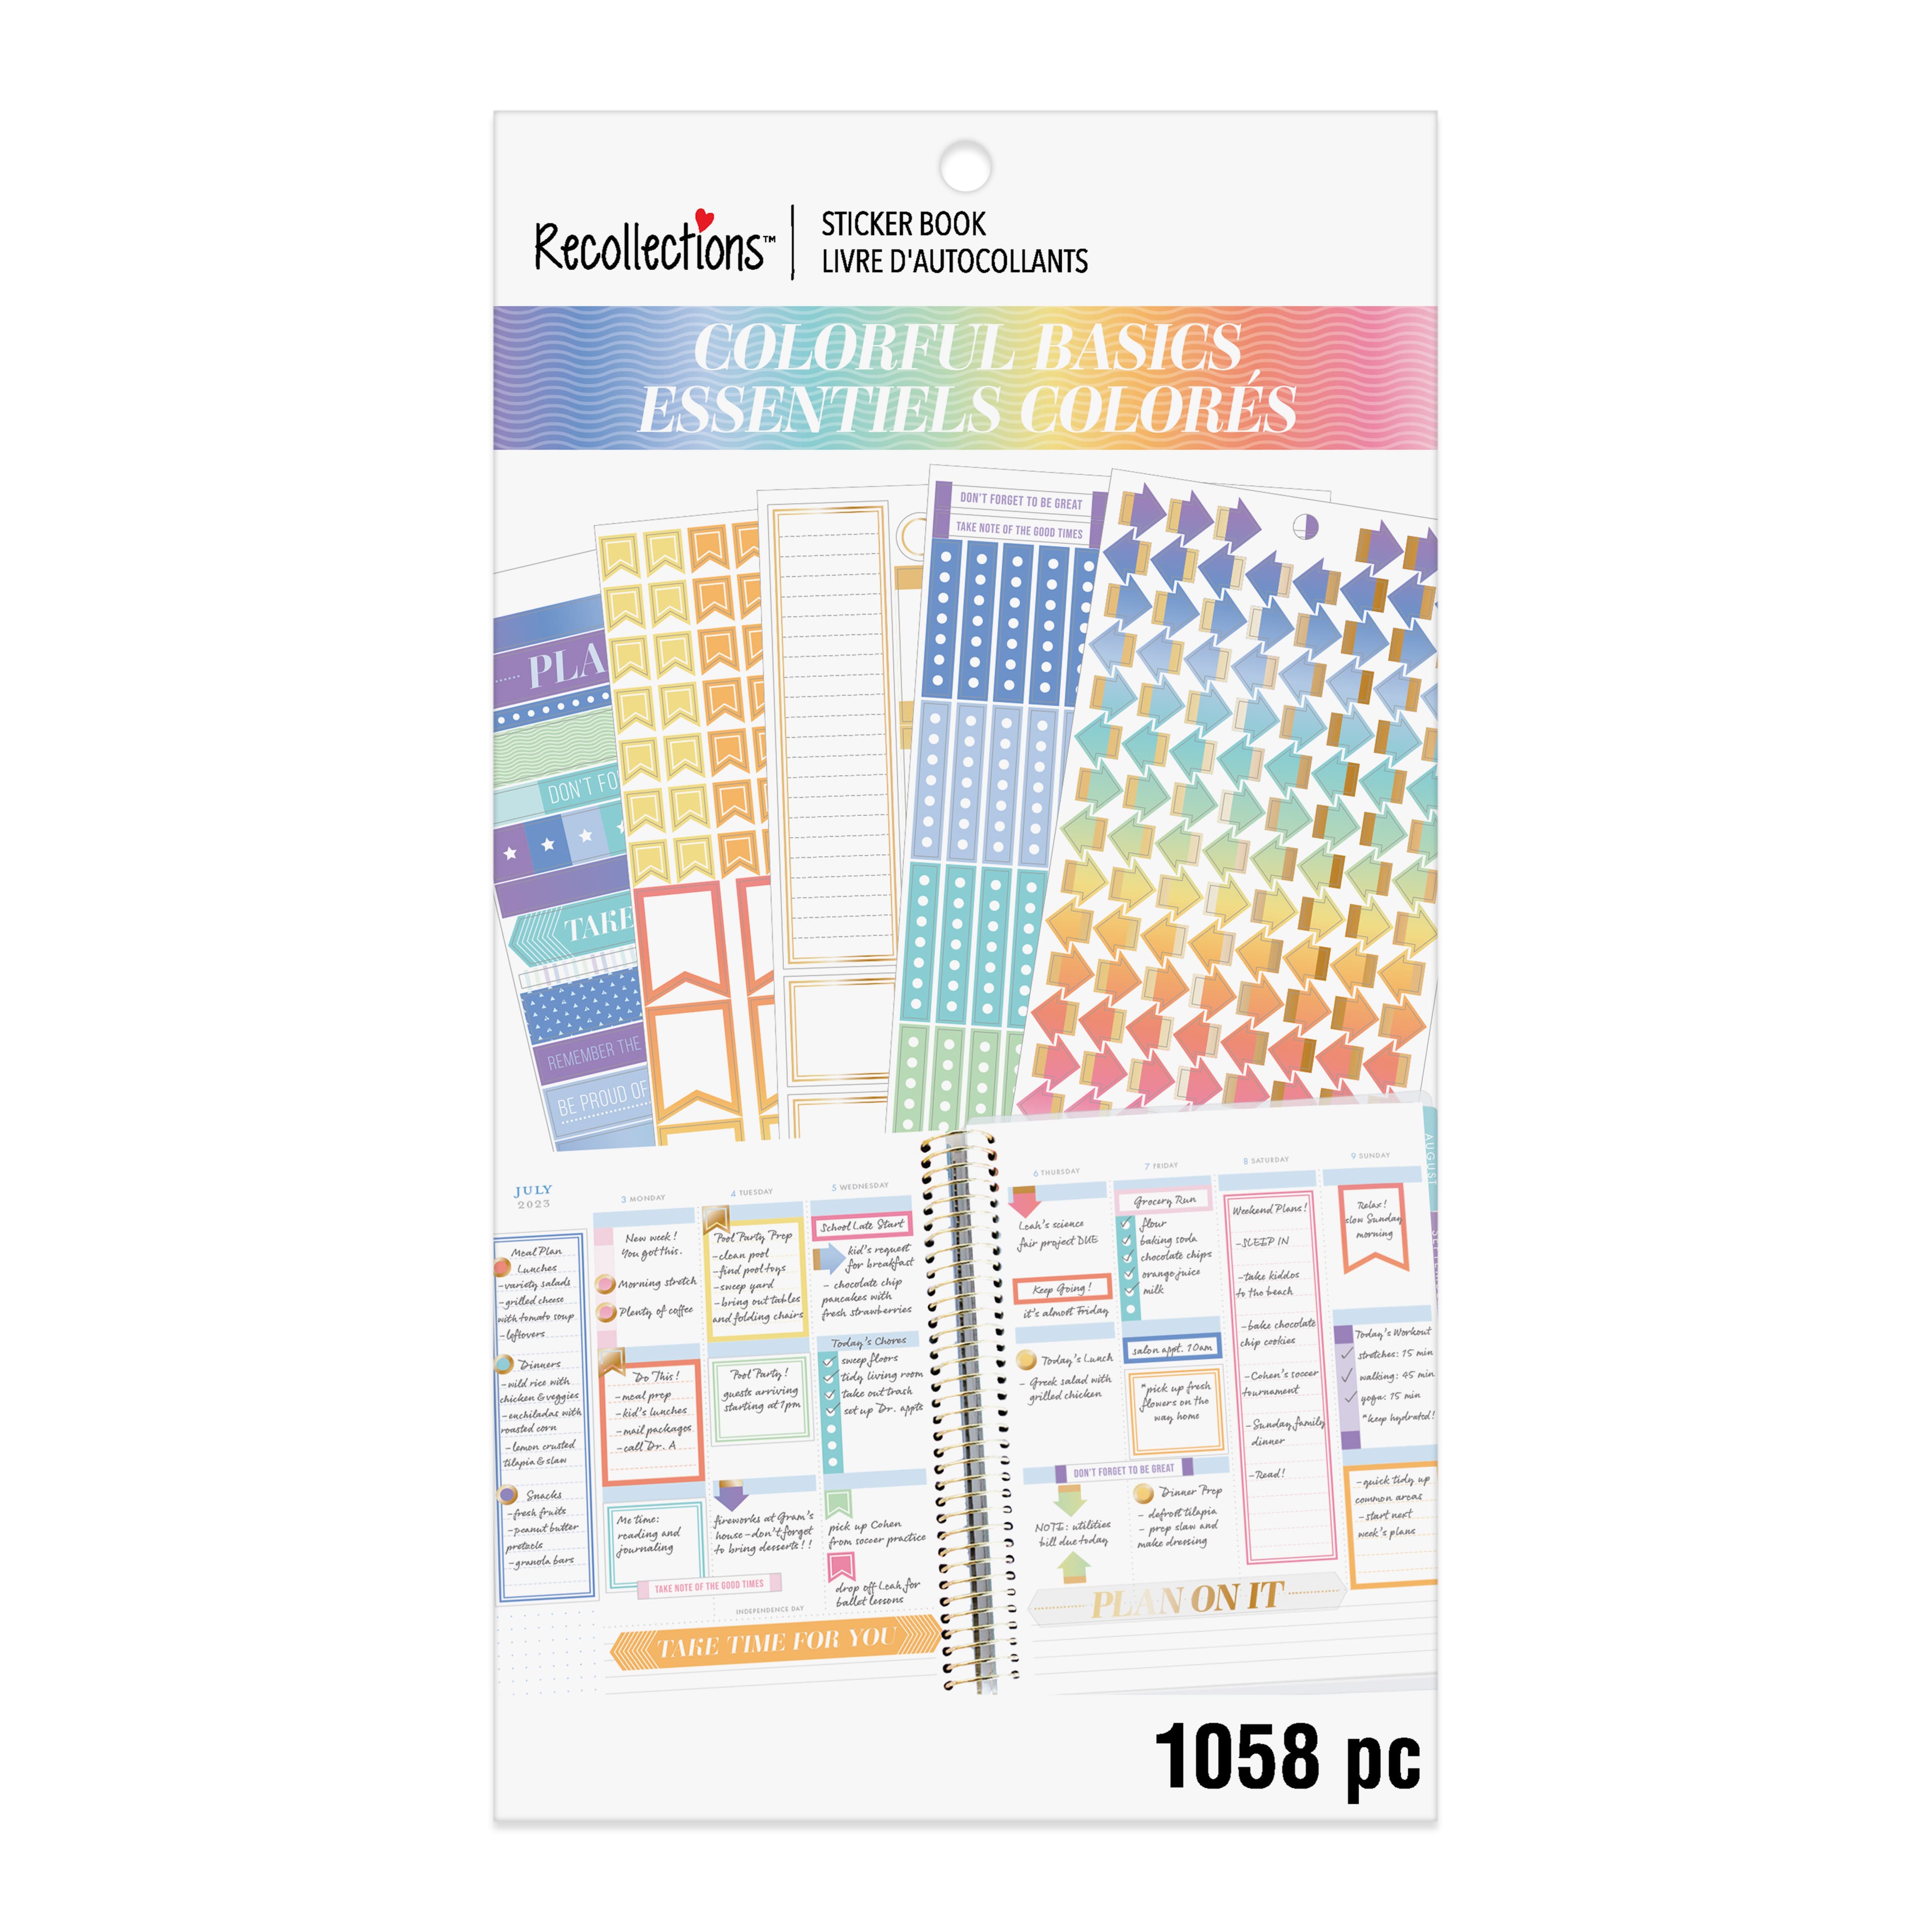  537 Pc Recollections Sticker Book / Planner